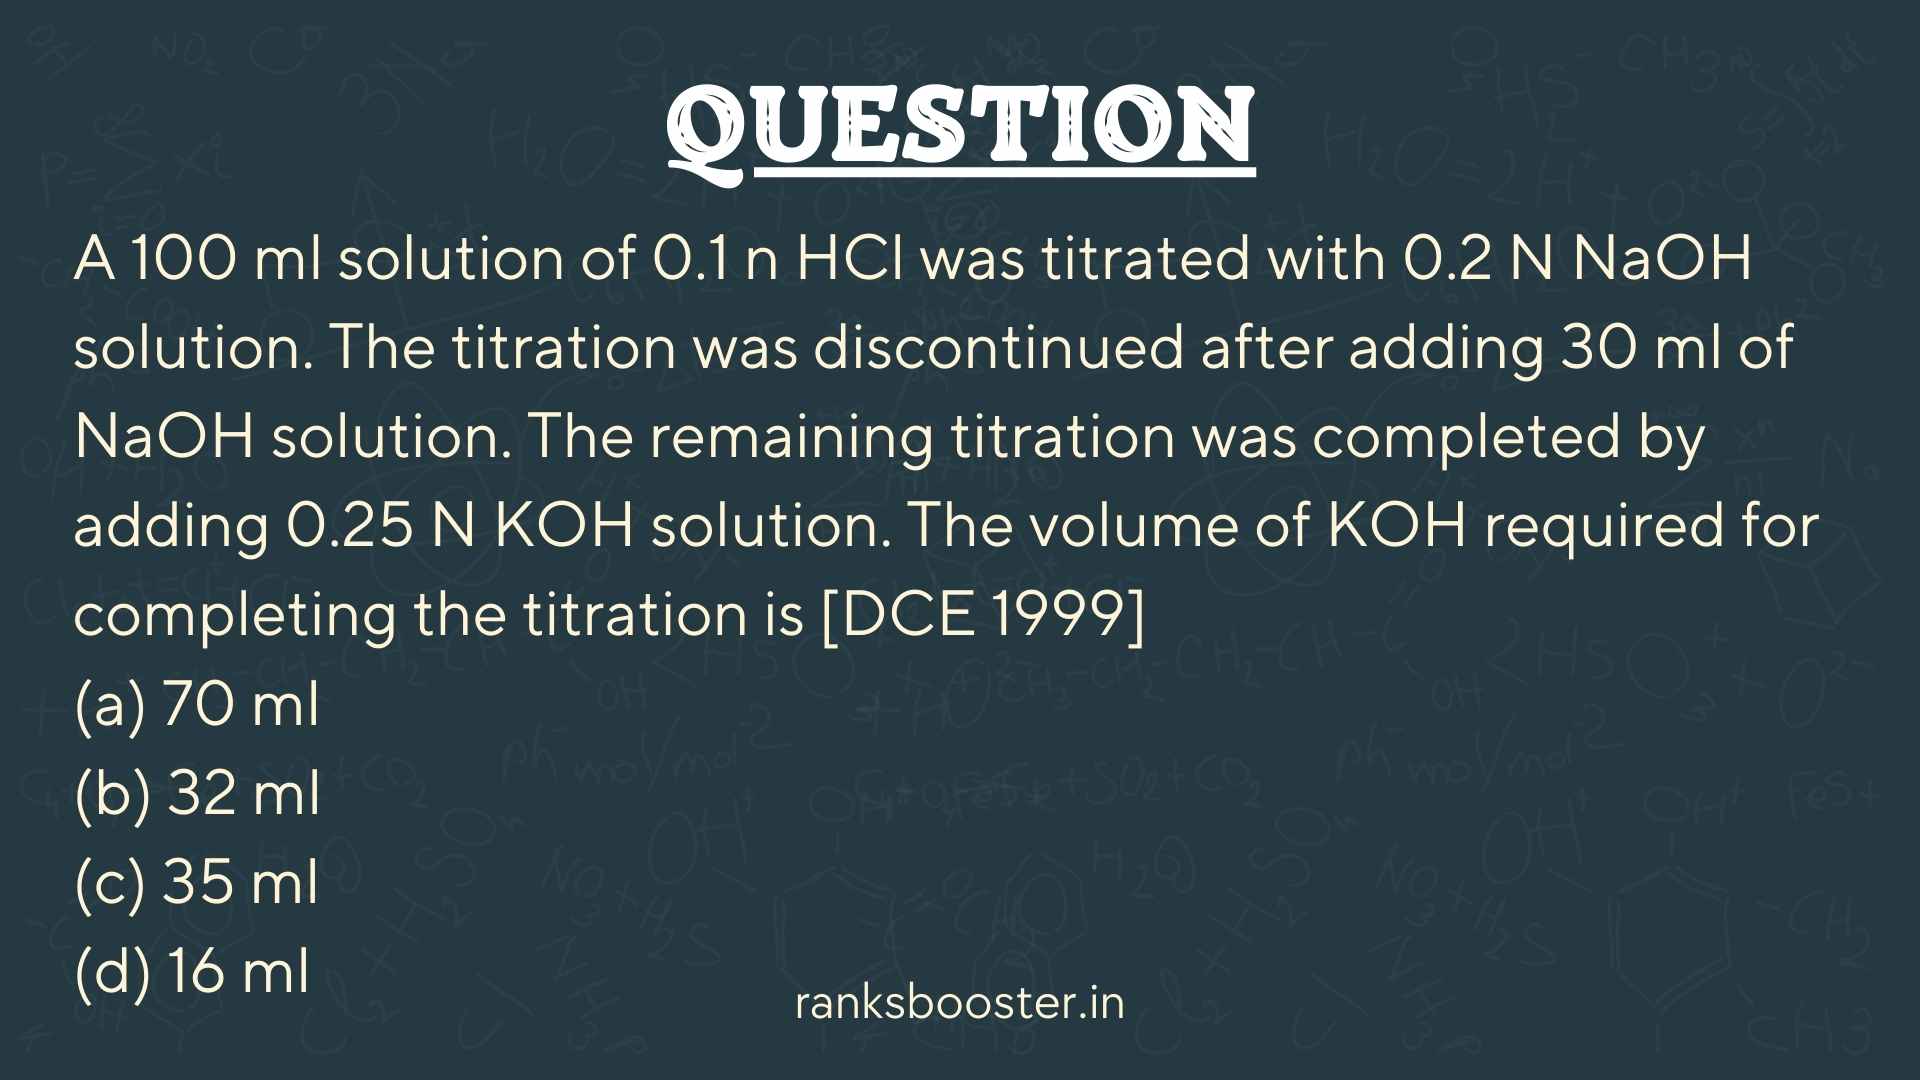 Question: A 100 ml solution of 0.1 n HCl was titrated with 0.2 N NaOH solution. The titration was discontinued after adding 30 ml of NaOH solution. The remaining titration was completed by adding 0.25 N KOH solution. The volume of KOH required for completing the titration is [DCE 1999] (a) 70 ml (b) 32 ml (c) 35 ml (d) 16 ml